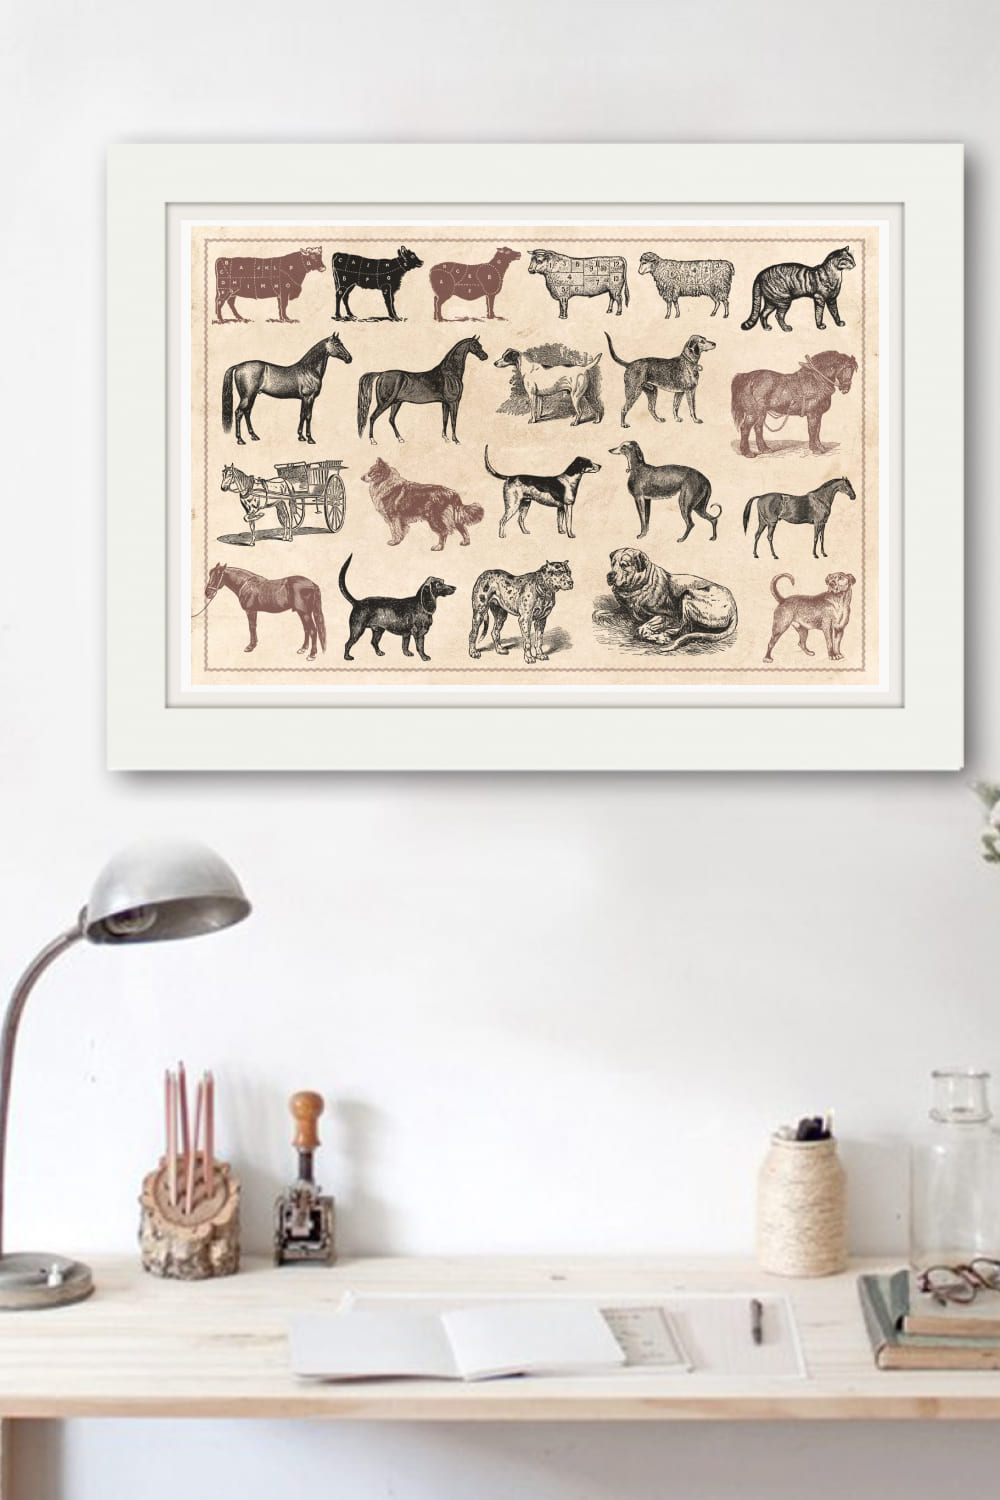 This set contains 100 vintage engravings and hand-drawn illustrations of farm animals.